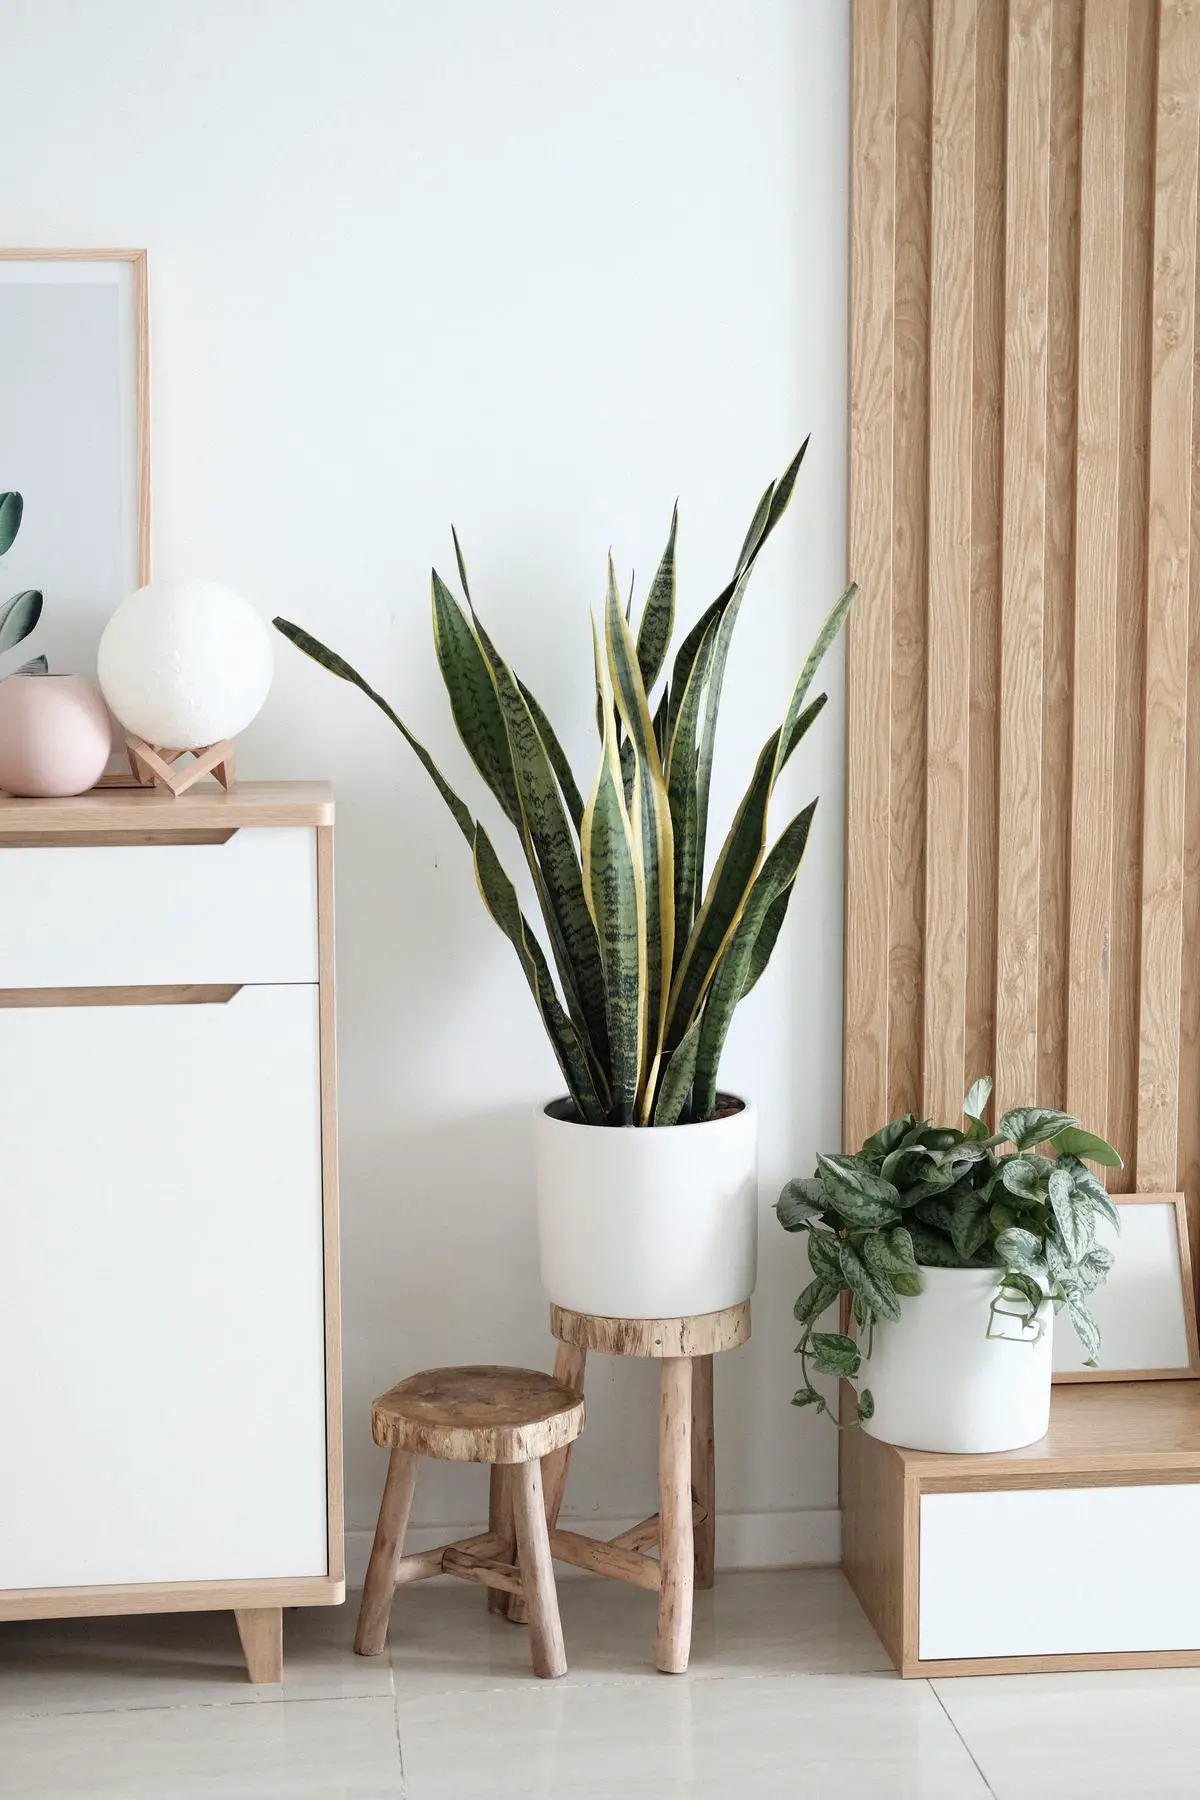 A variety of lush indoor plants, including a Snake Plant, Fiddle Leaf Fig, and Echeveria, displayed in stylish pots.